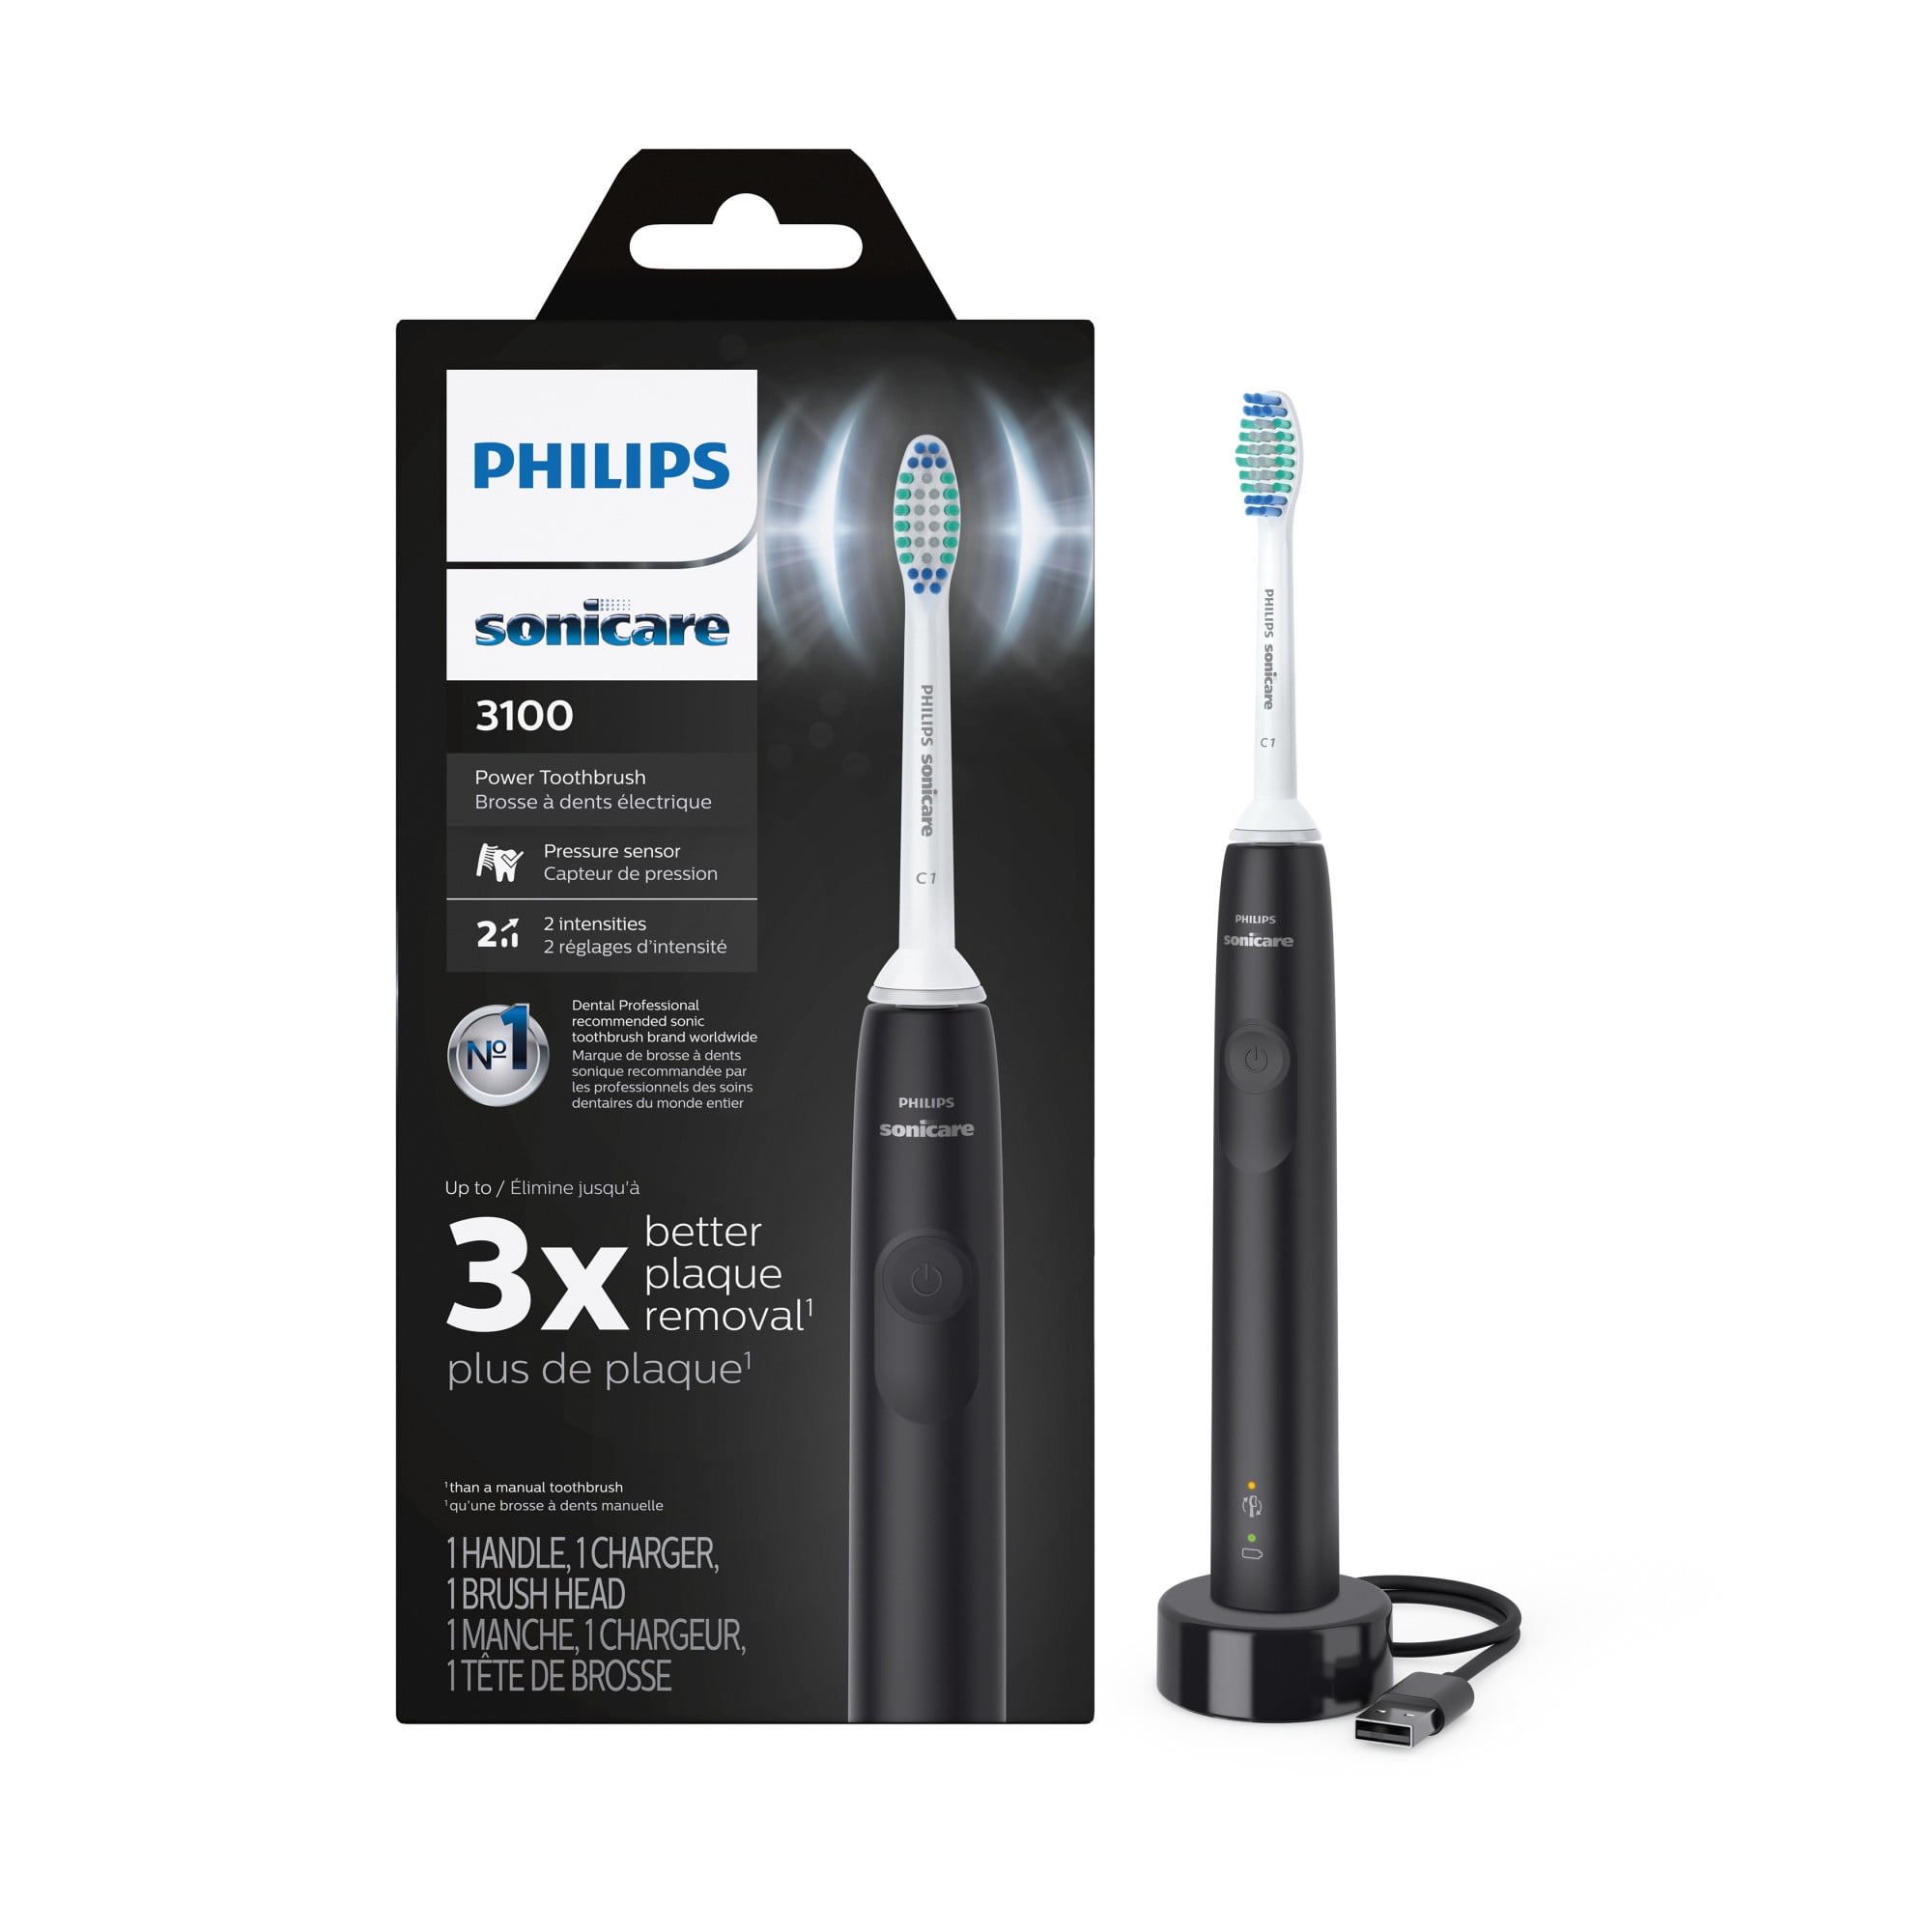 Philips Sonicare 3100 Power Toothbrush, Rechargeable Electric Toothbrush  with Pressure Sensor, Black HX3681/04